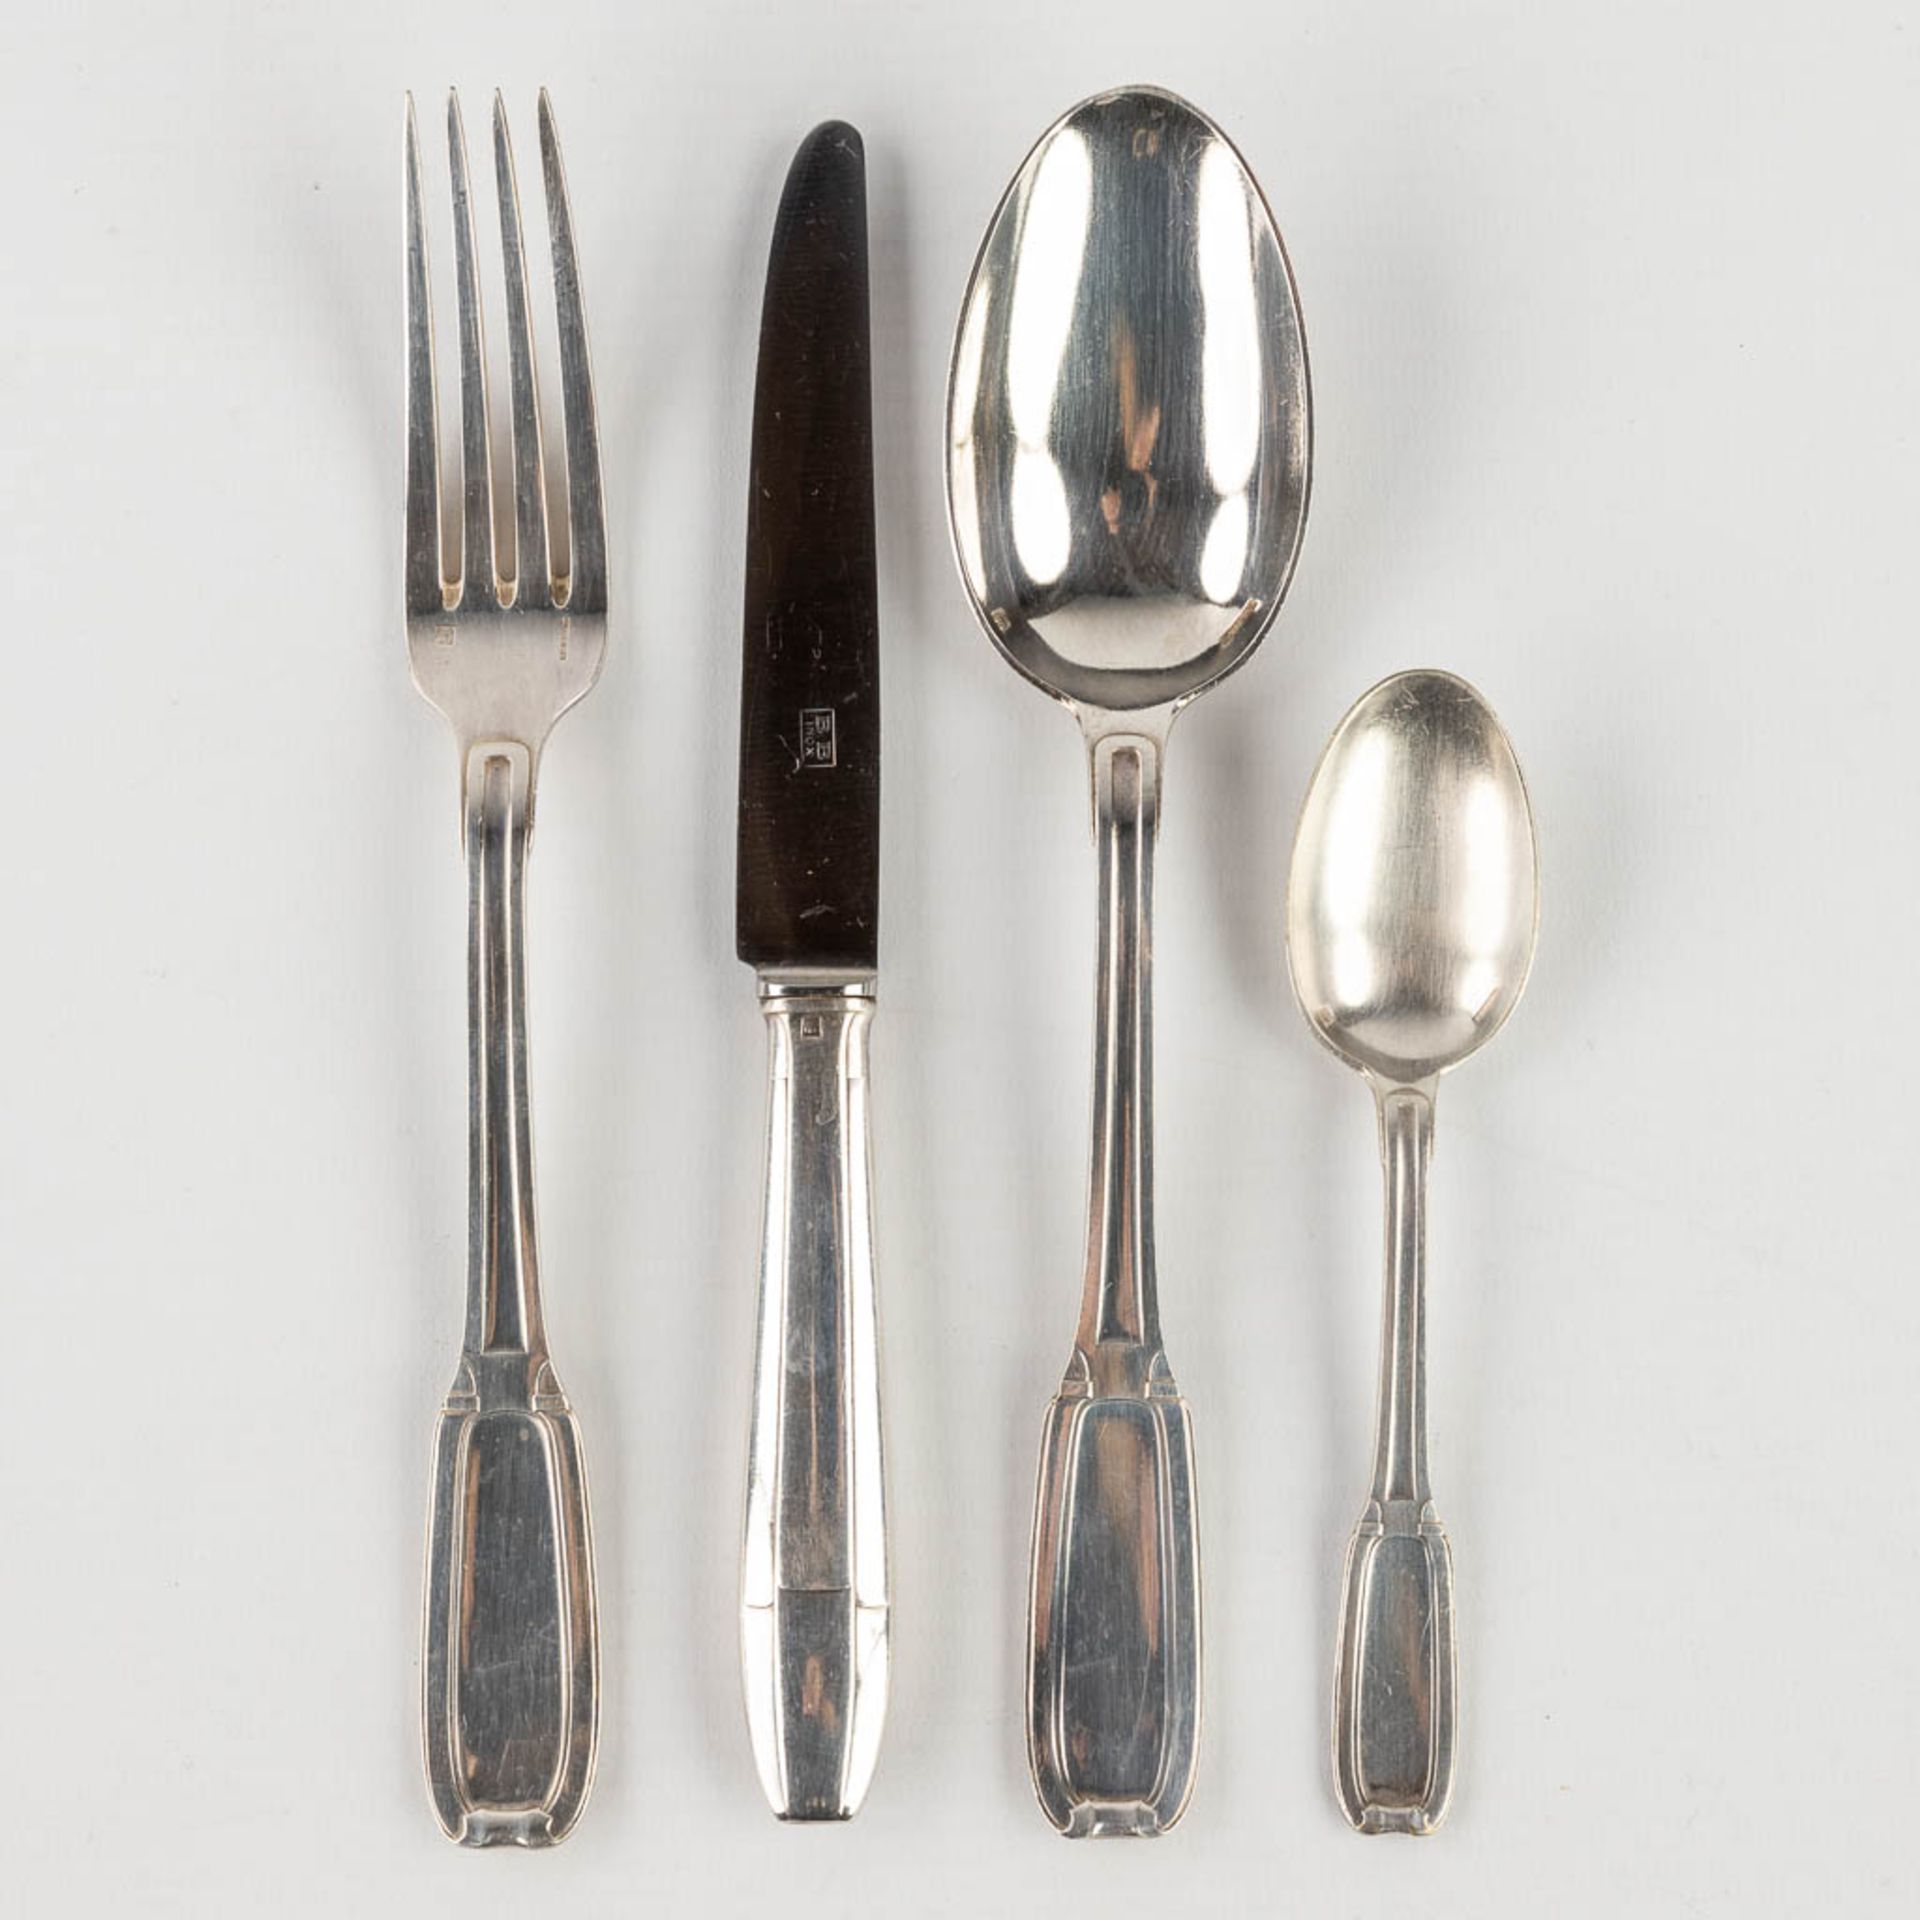 Two Ecrins with silver spoons, added 1 Ecrin with pieces of silver-plated cutlery marked Boulinger. - Image 4 of 18